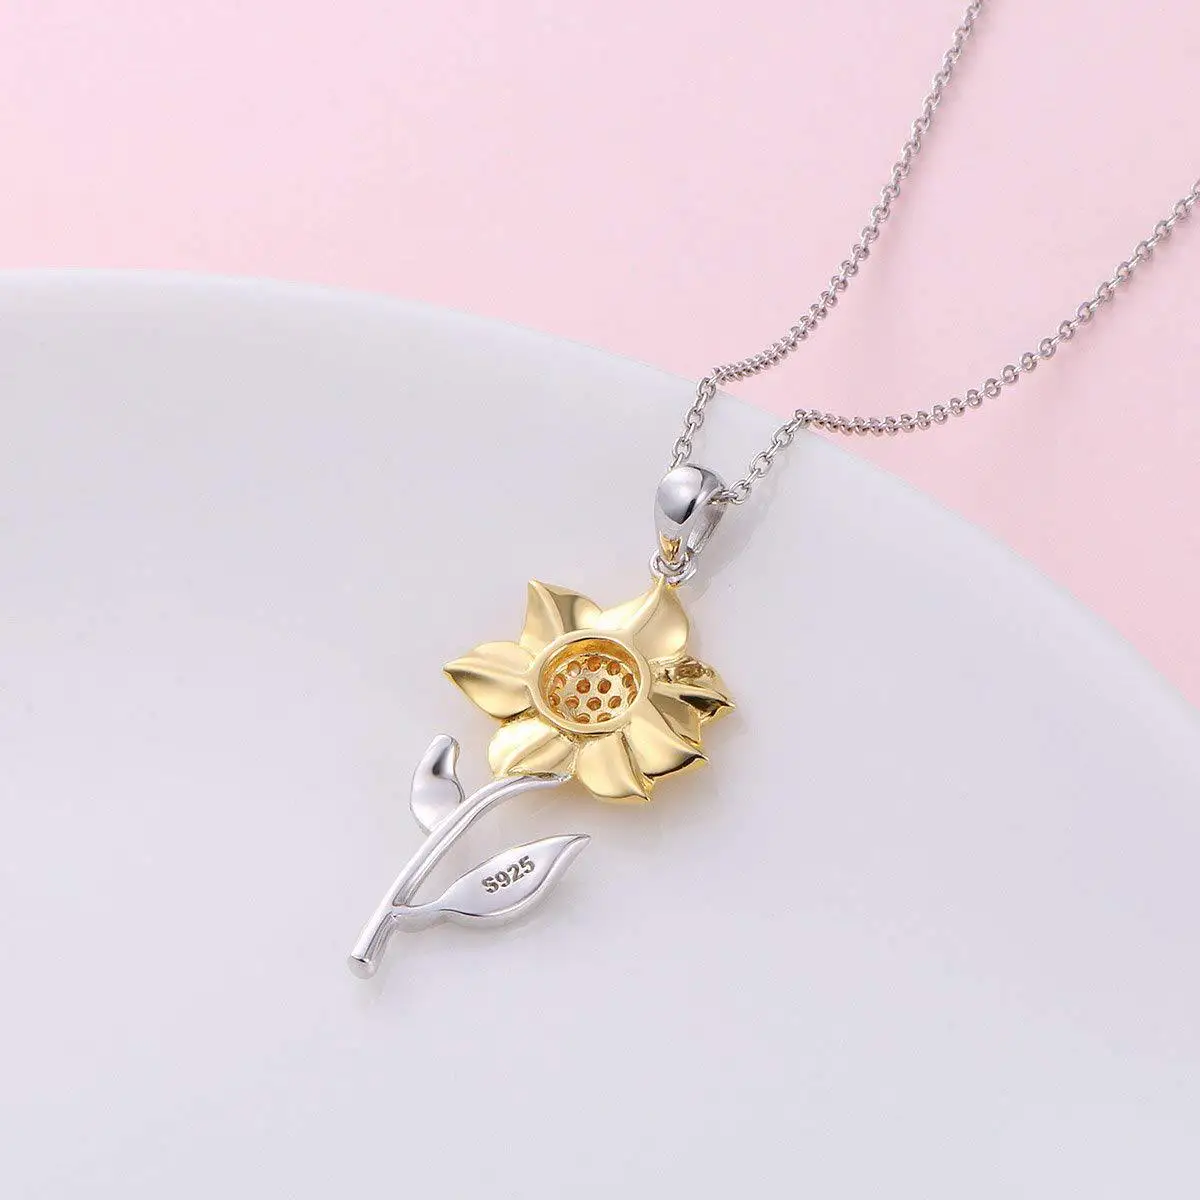 Gold silver two tone pendant sunflower shaped necklace